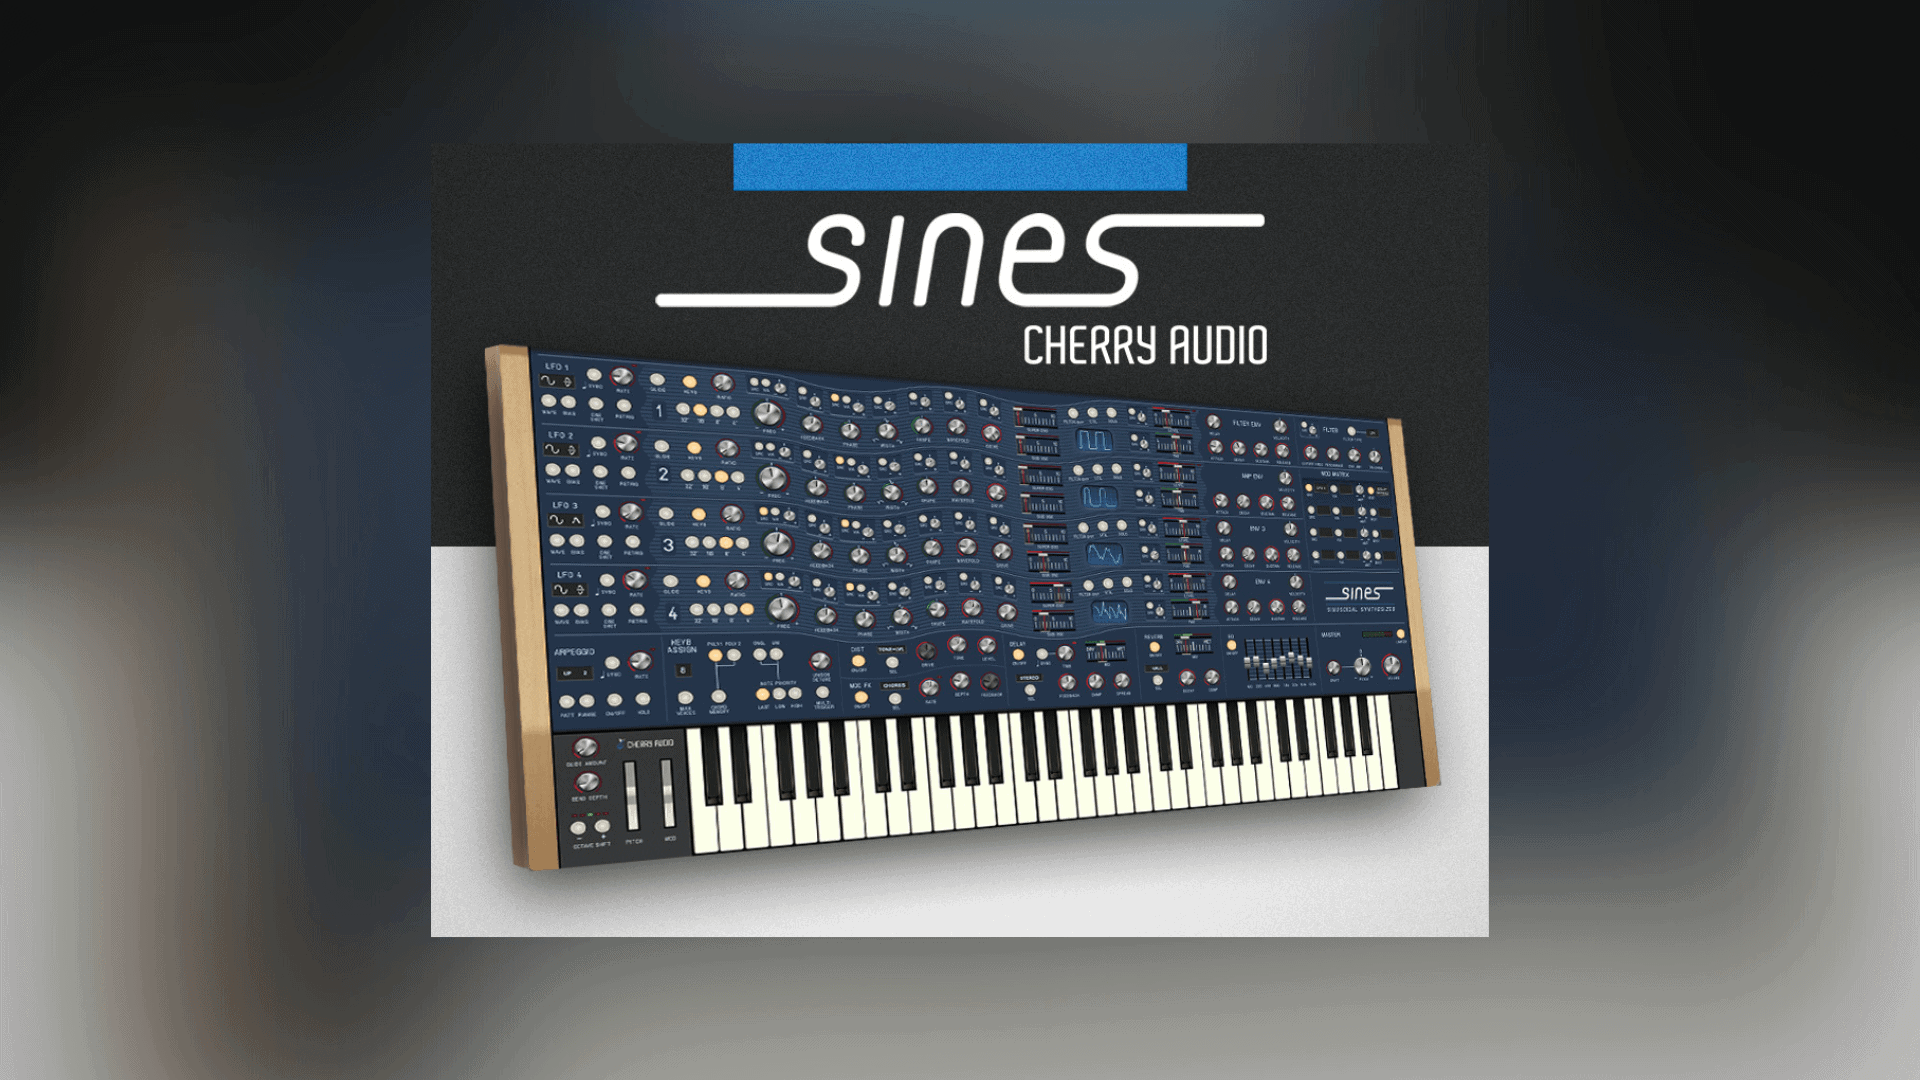 Cherry Audio release their newest digital synthesizer, Sines